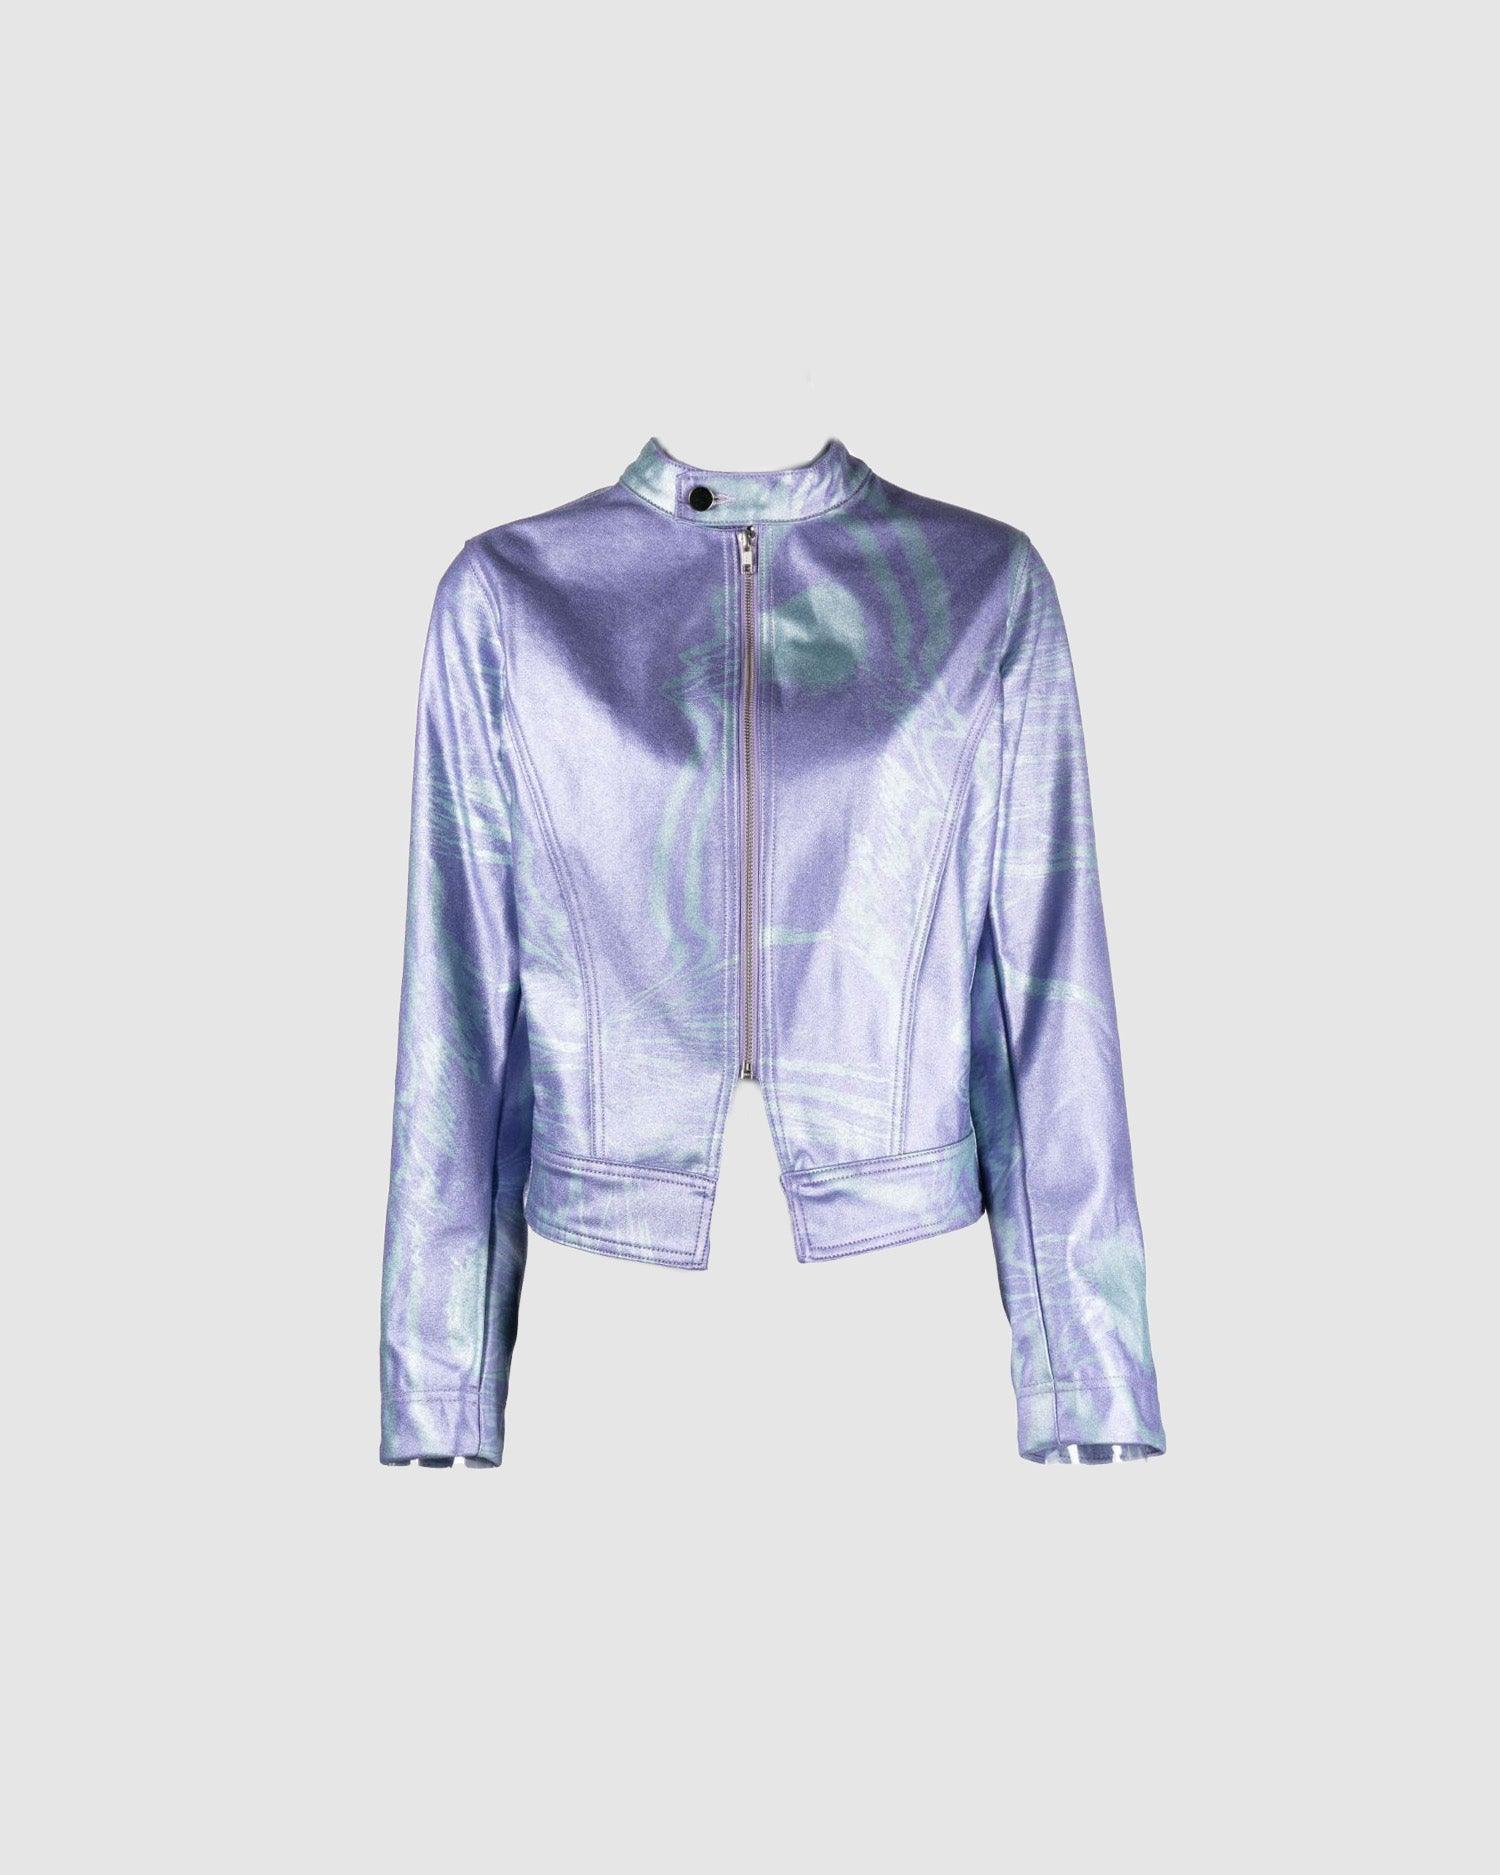 Metallic Racing Jacket - {{ collection.title }} - Chinatown Country Club 